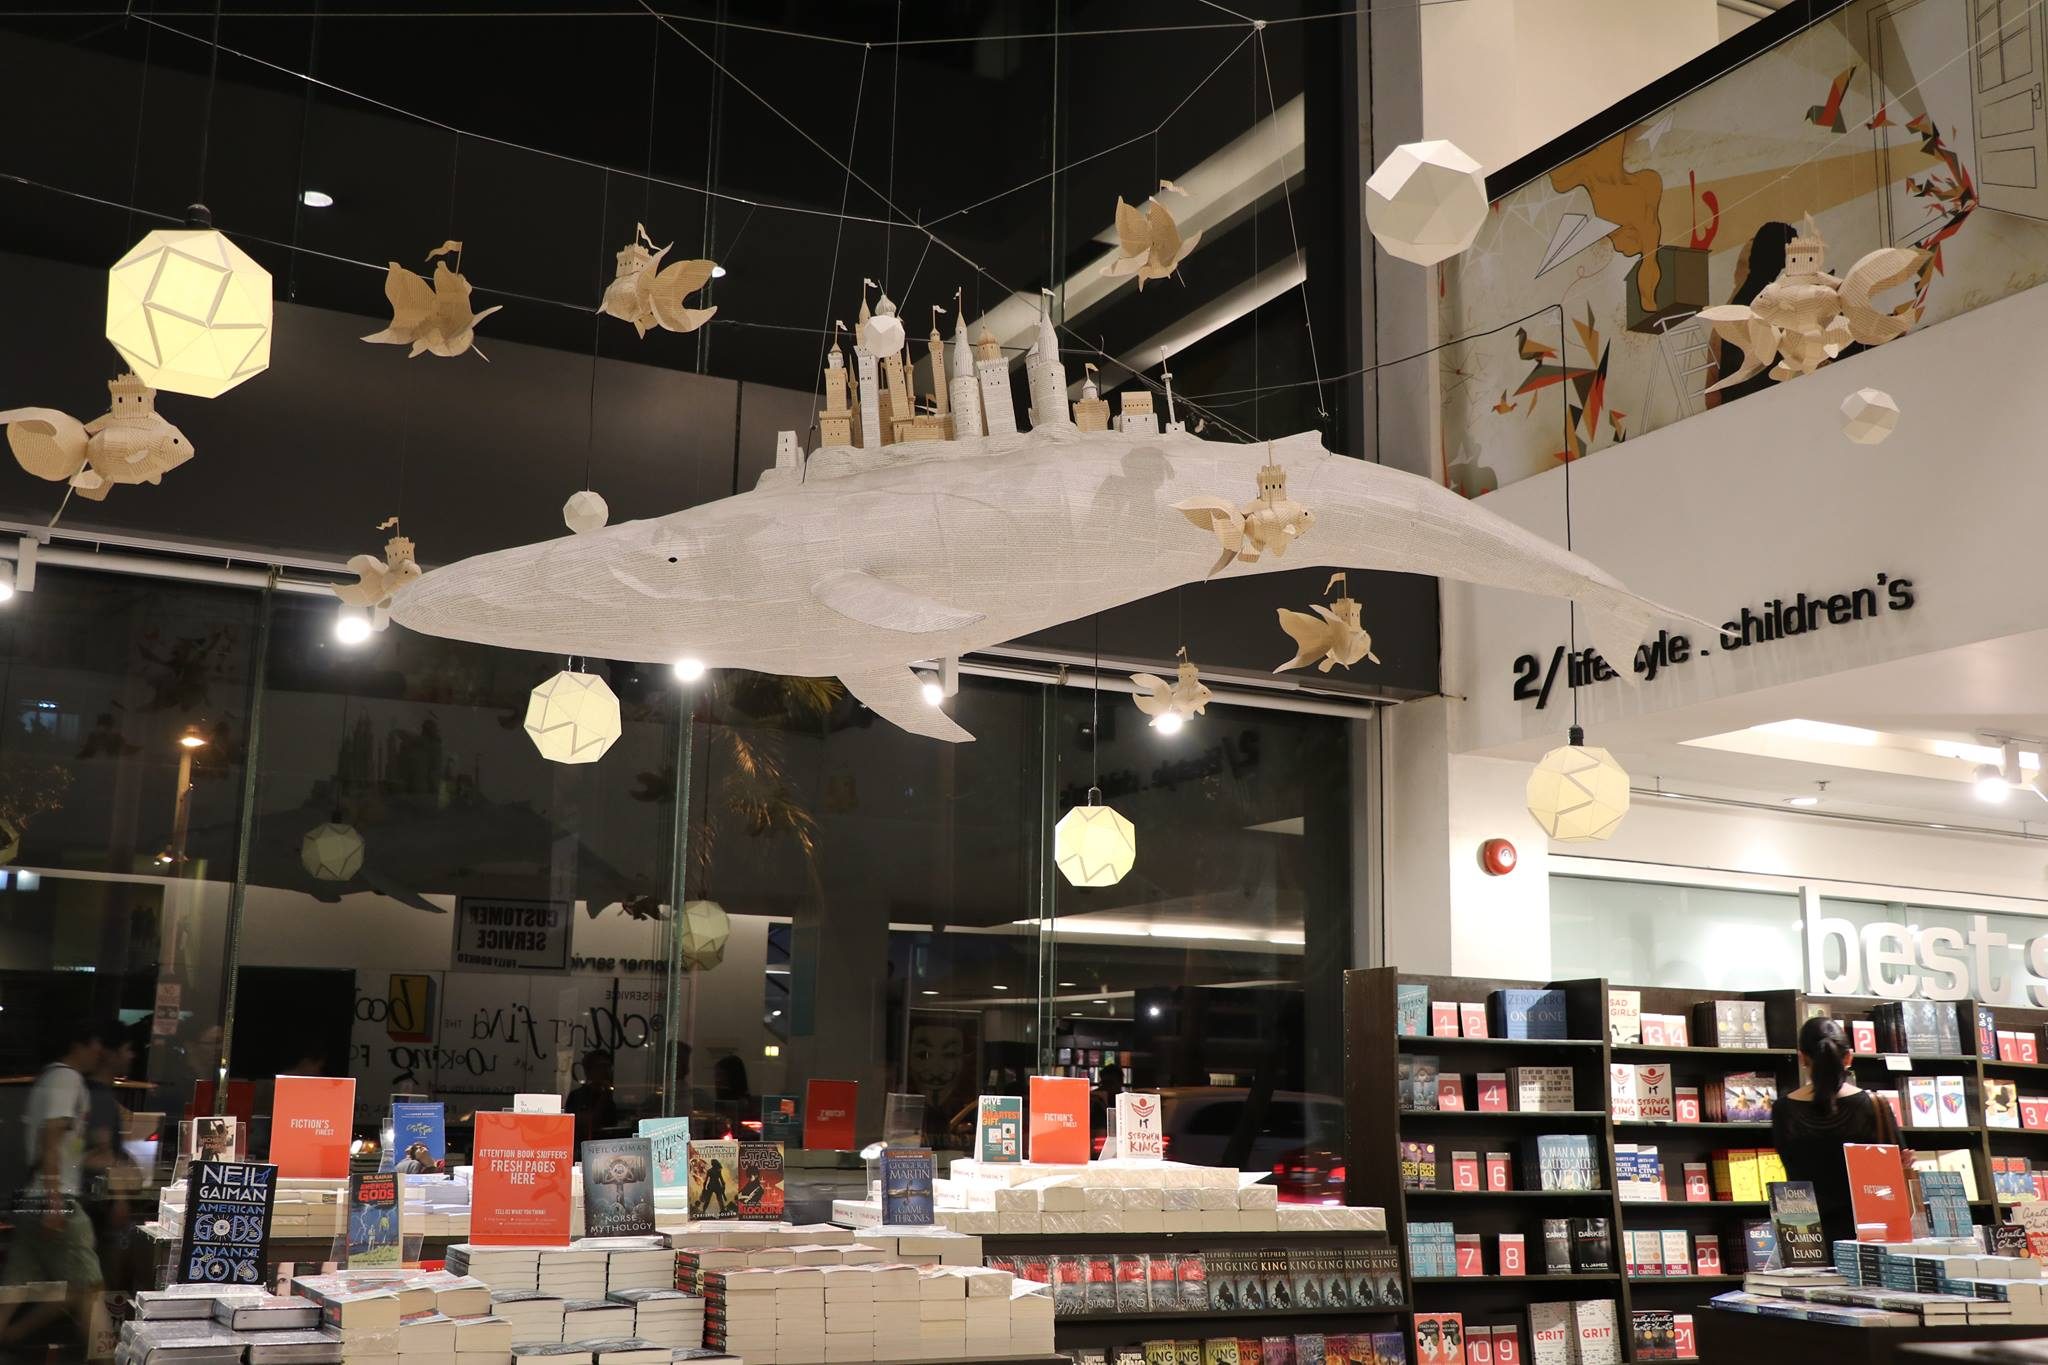 After closing 3 branches, what should we expect from Fully Booked’s next chapter?